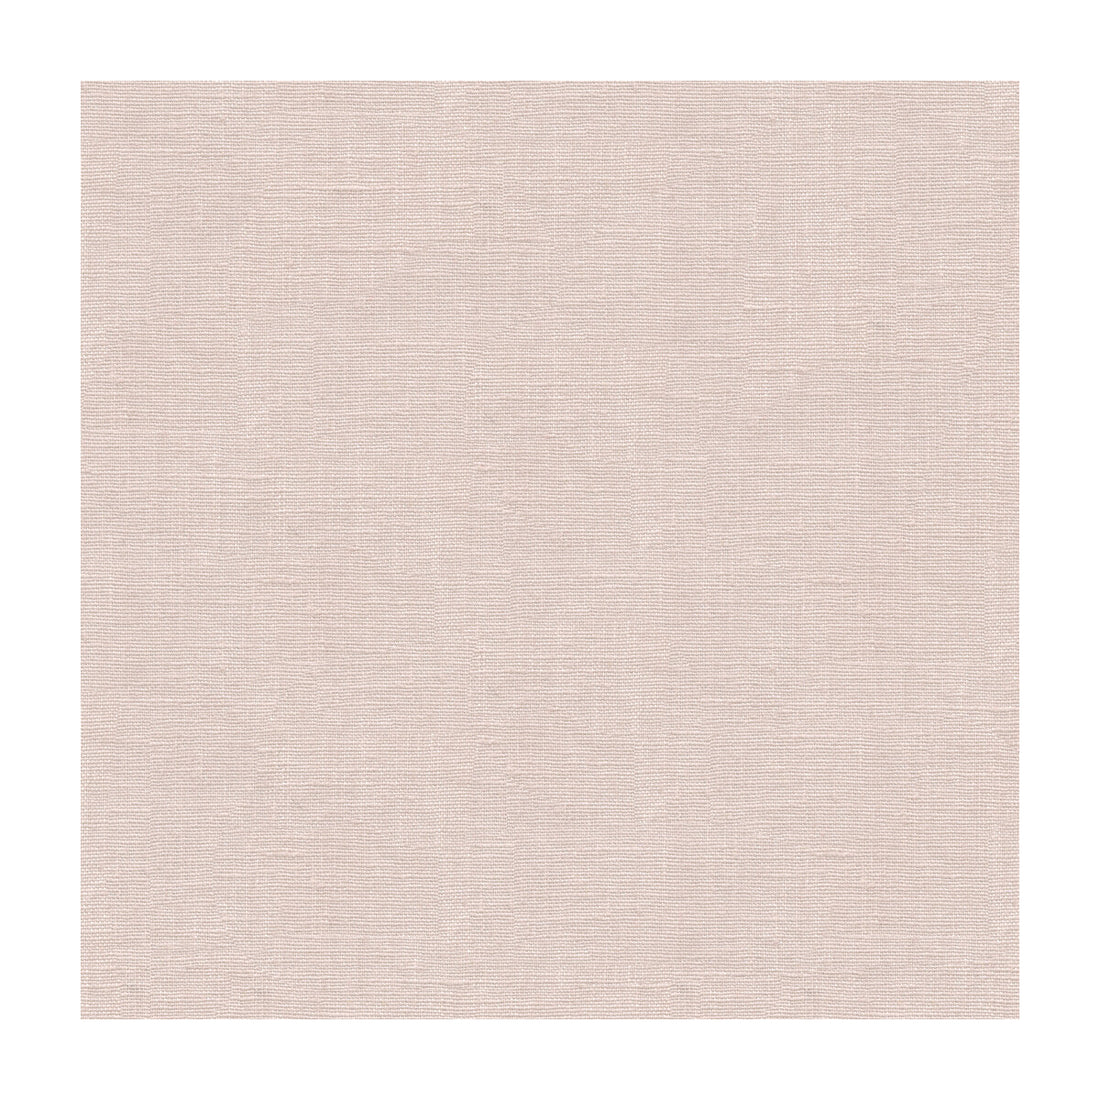 Dublin fabric in pink color - pattern 32344.17.0 - by Kravet Basics in the Perfect Plains collection